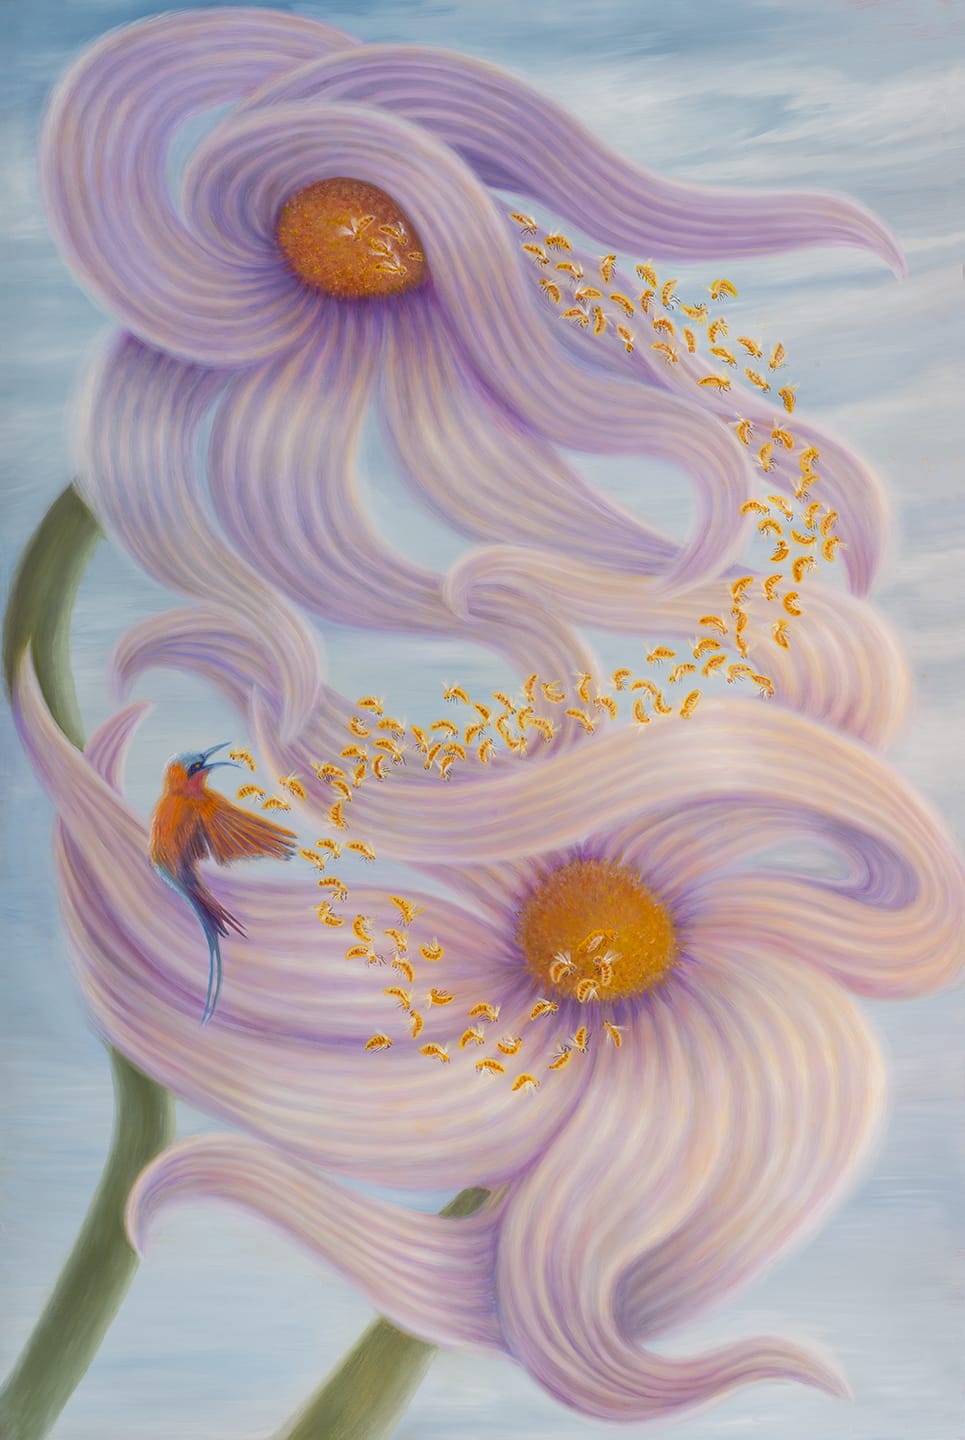 Cynthia James Portrays Otherworldly Pollinators and Plants in Her Dreamlike ‘Bee Series’